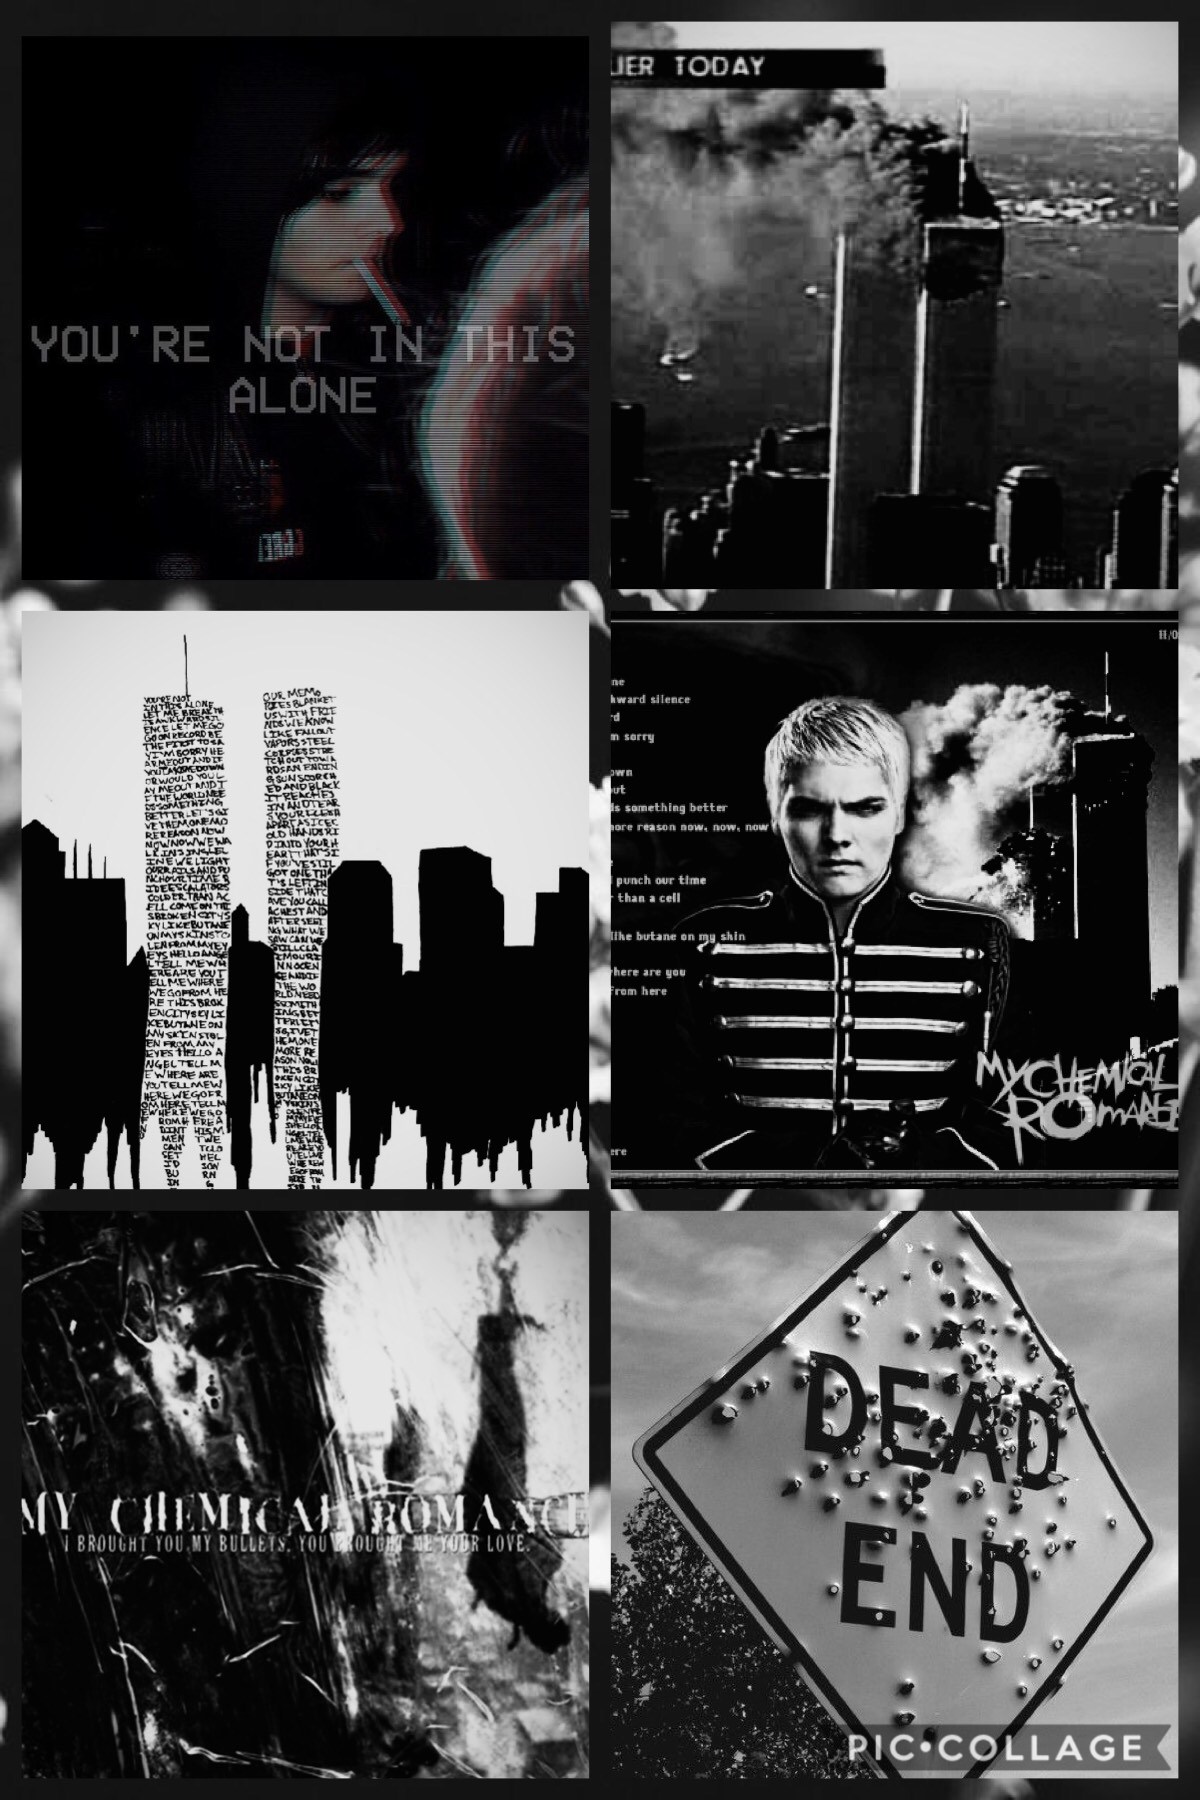 So this is kinda late, so my apologies, but this is in memory of all those poor amazing people who died on 9/11 due to the tragedy that happened that day. Gerard Way the singer from My Chemical Romance experienced it that day in a neighboring building, an